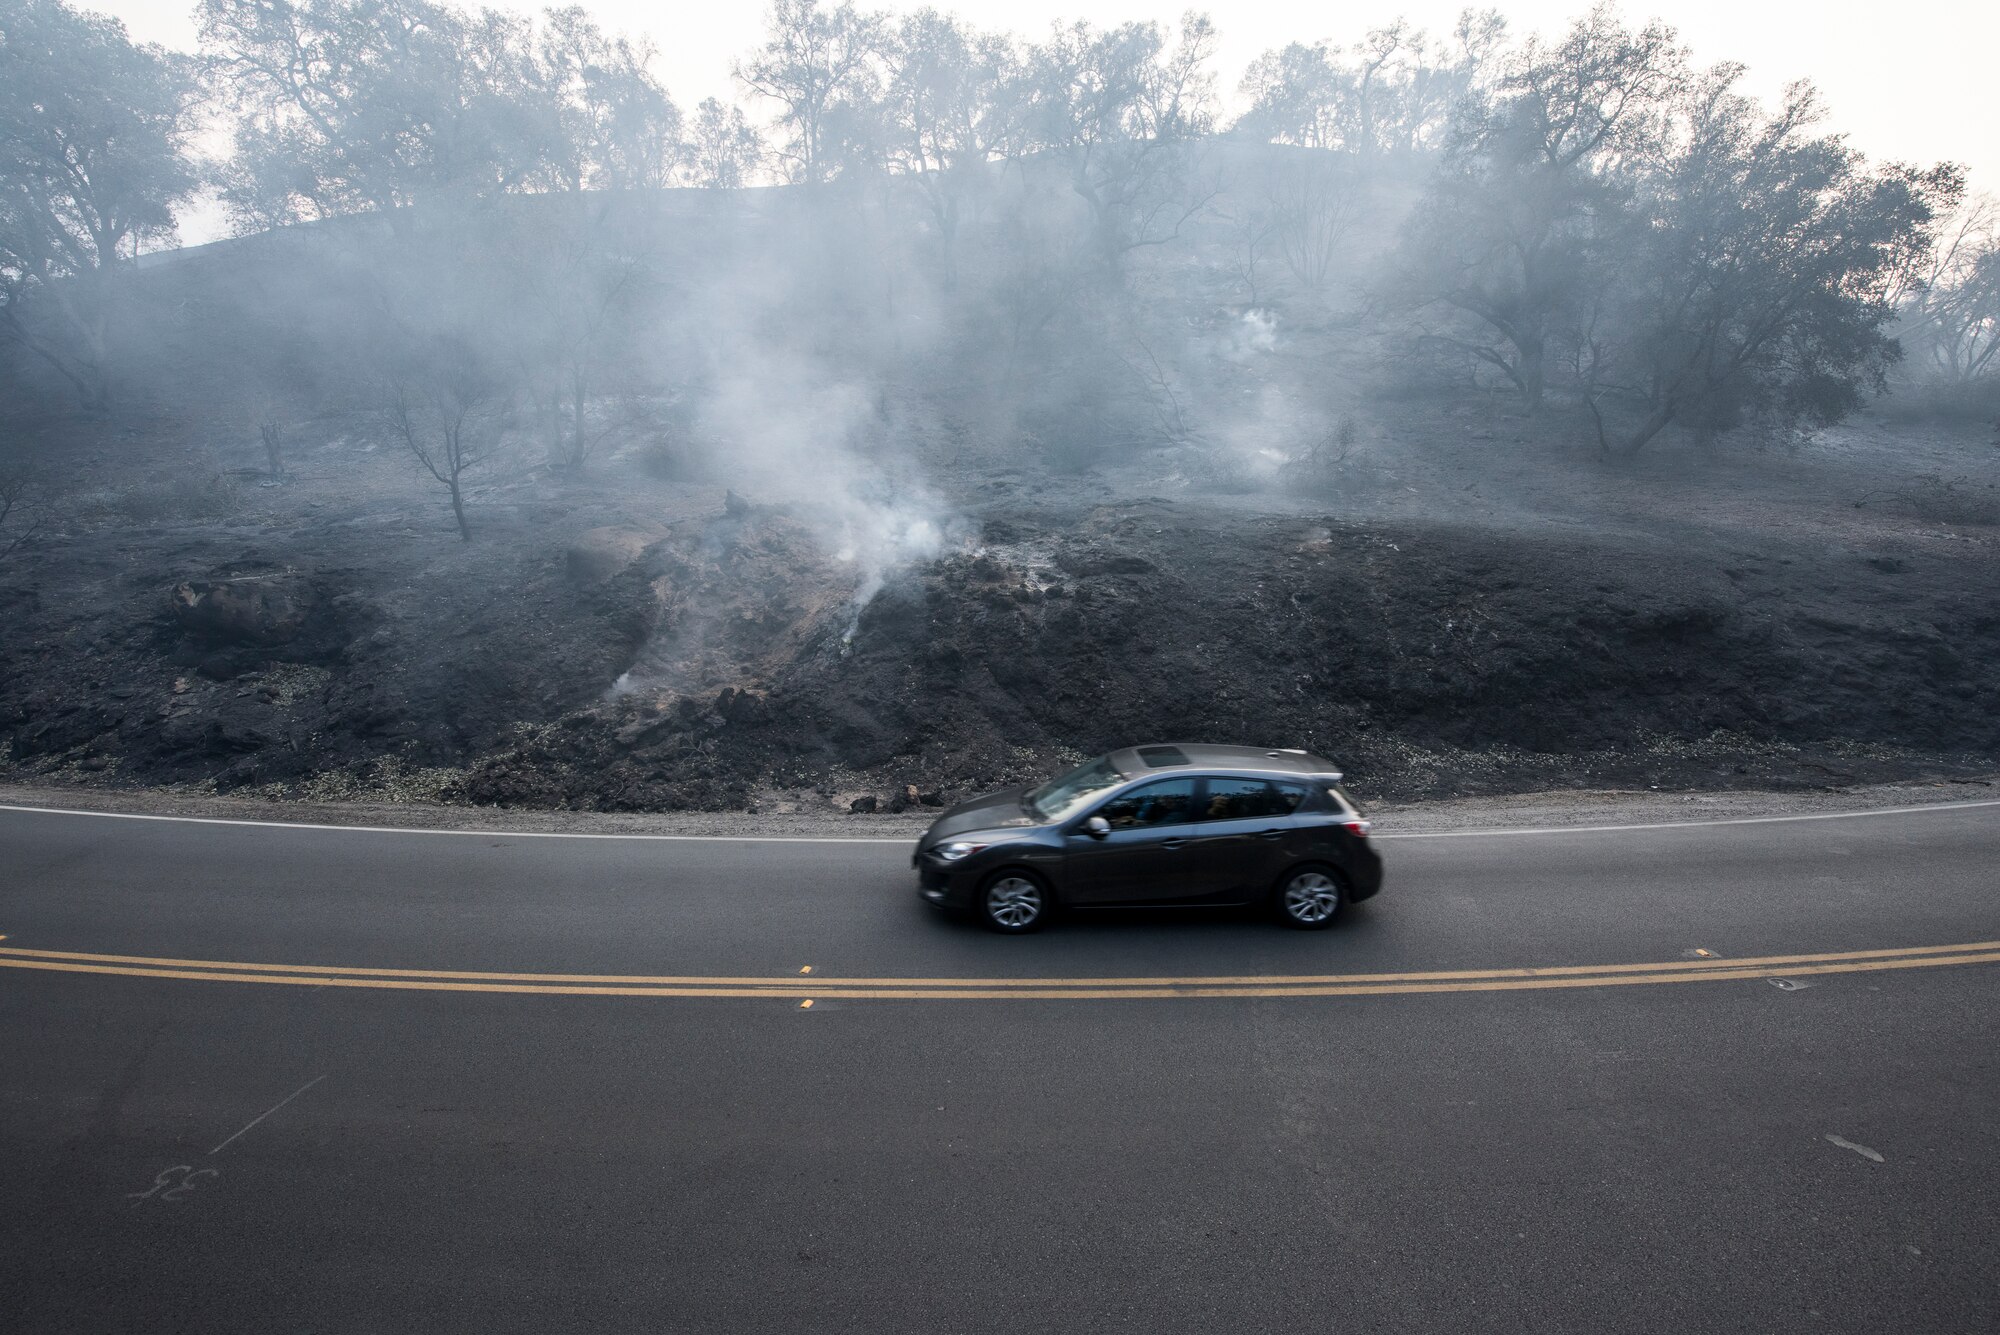 A car drives by a still burning hill in Ojai, California, Dec. 12, 2017. The Thomas Fire started on Dec. 4, 2017 in Santa Paula, near Thomas Aquinas College. Driven by Santa Ana winds gusting up to 70 mph, the flames screamed across the hillsides toward Ojai, Ventura and Santa Barbara. The 146 Airlift Wing was activated Dec.5, 2017, to support CAL FIRE with wildfire suppression efforts within the state. (U.S. Air Force photo/Master Sgt. Brian Ferguson) (U.S. Air Force photo/Master Sgt. Brian Ferguson)